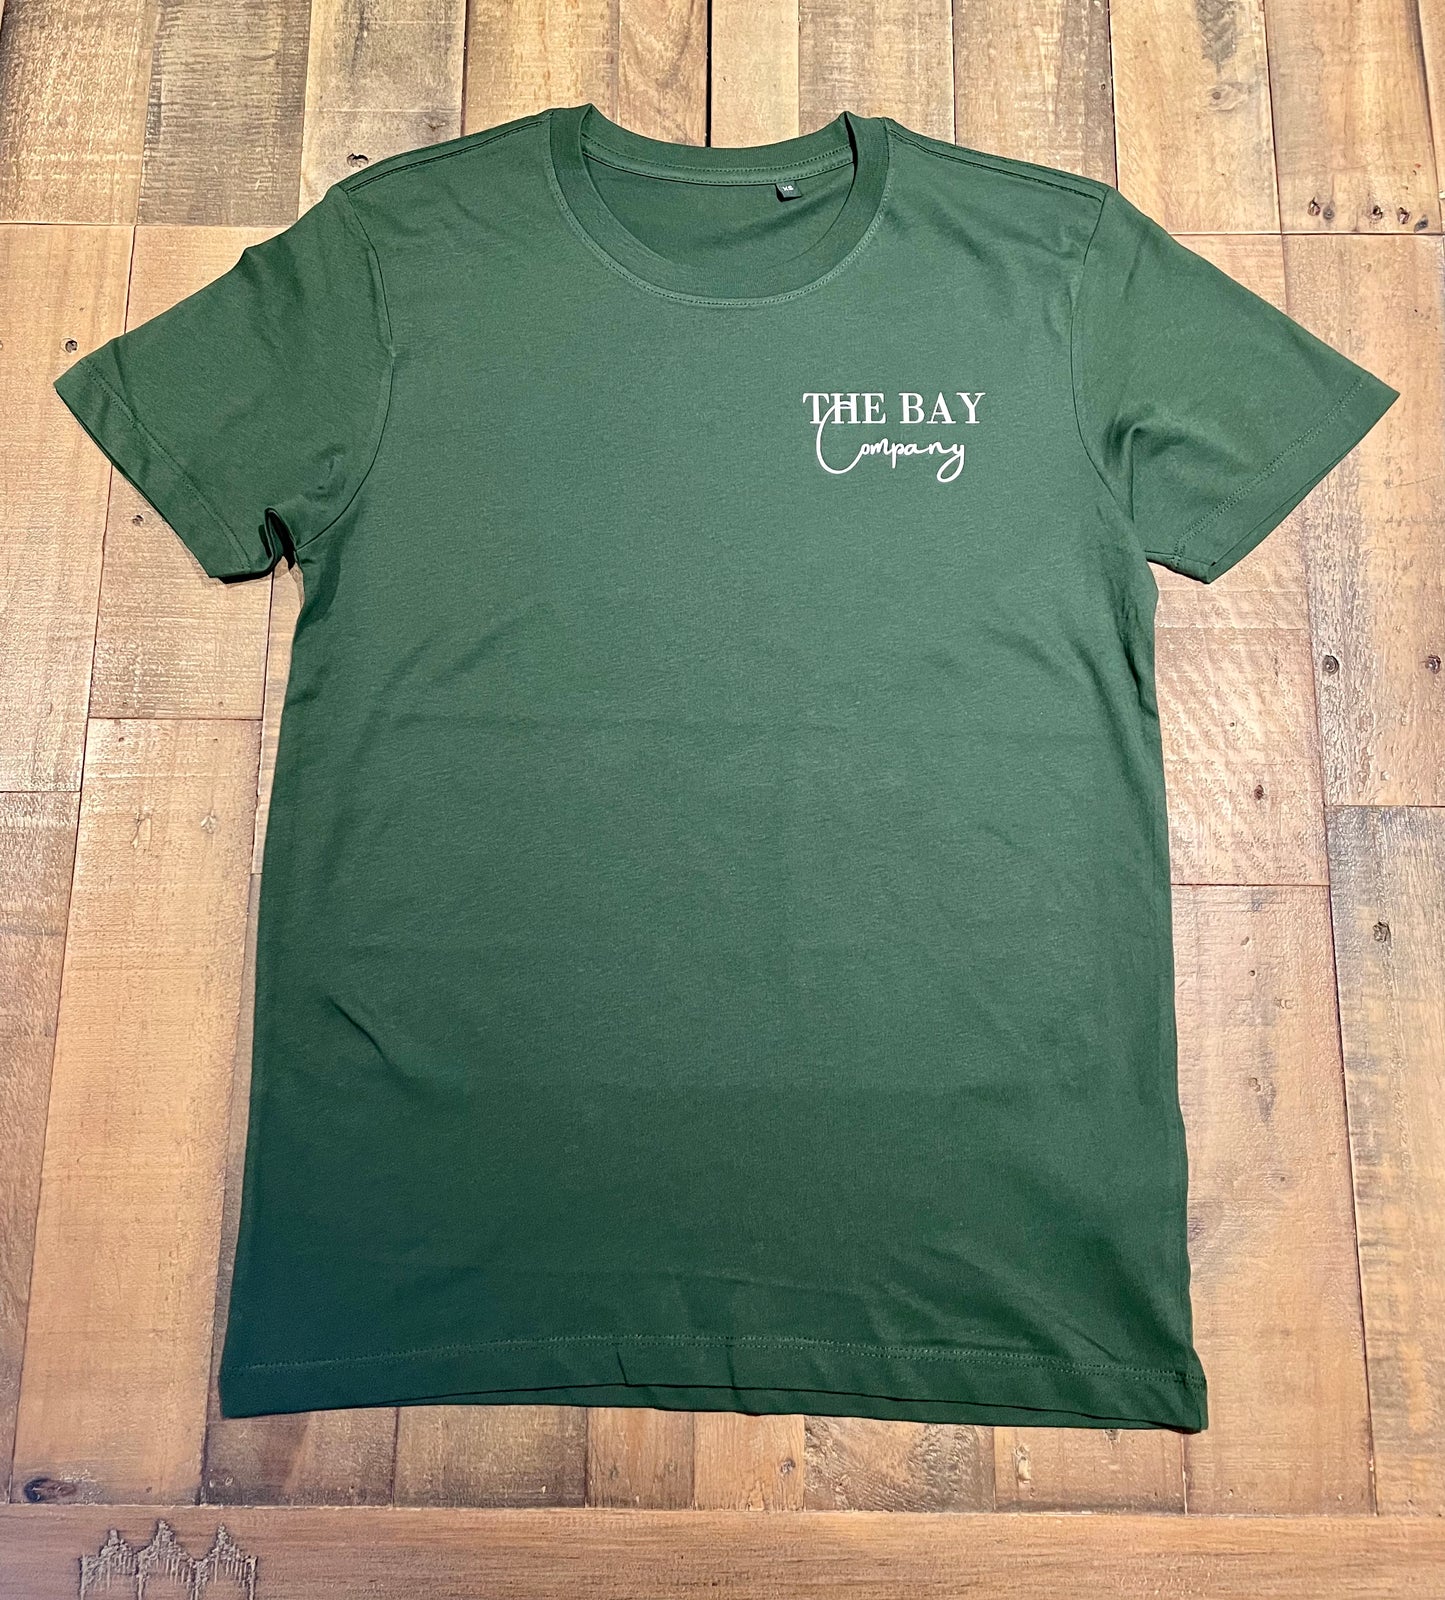 The unisex Robin Hood’s Bay T-shirts in forest green from The Bay Company. 